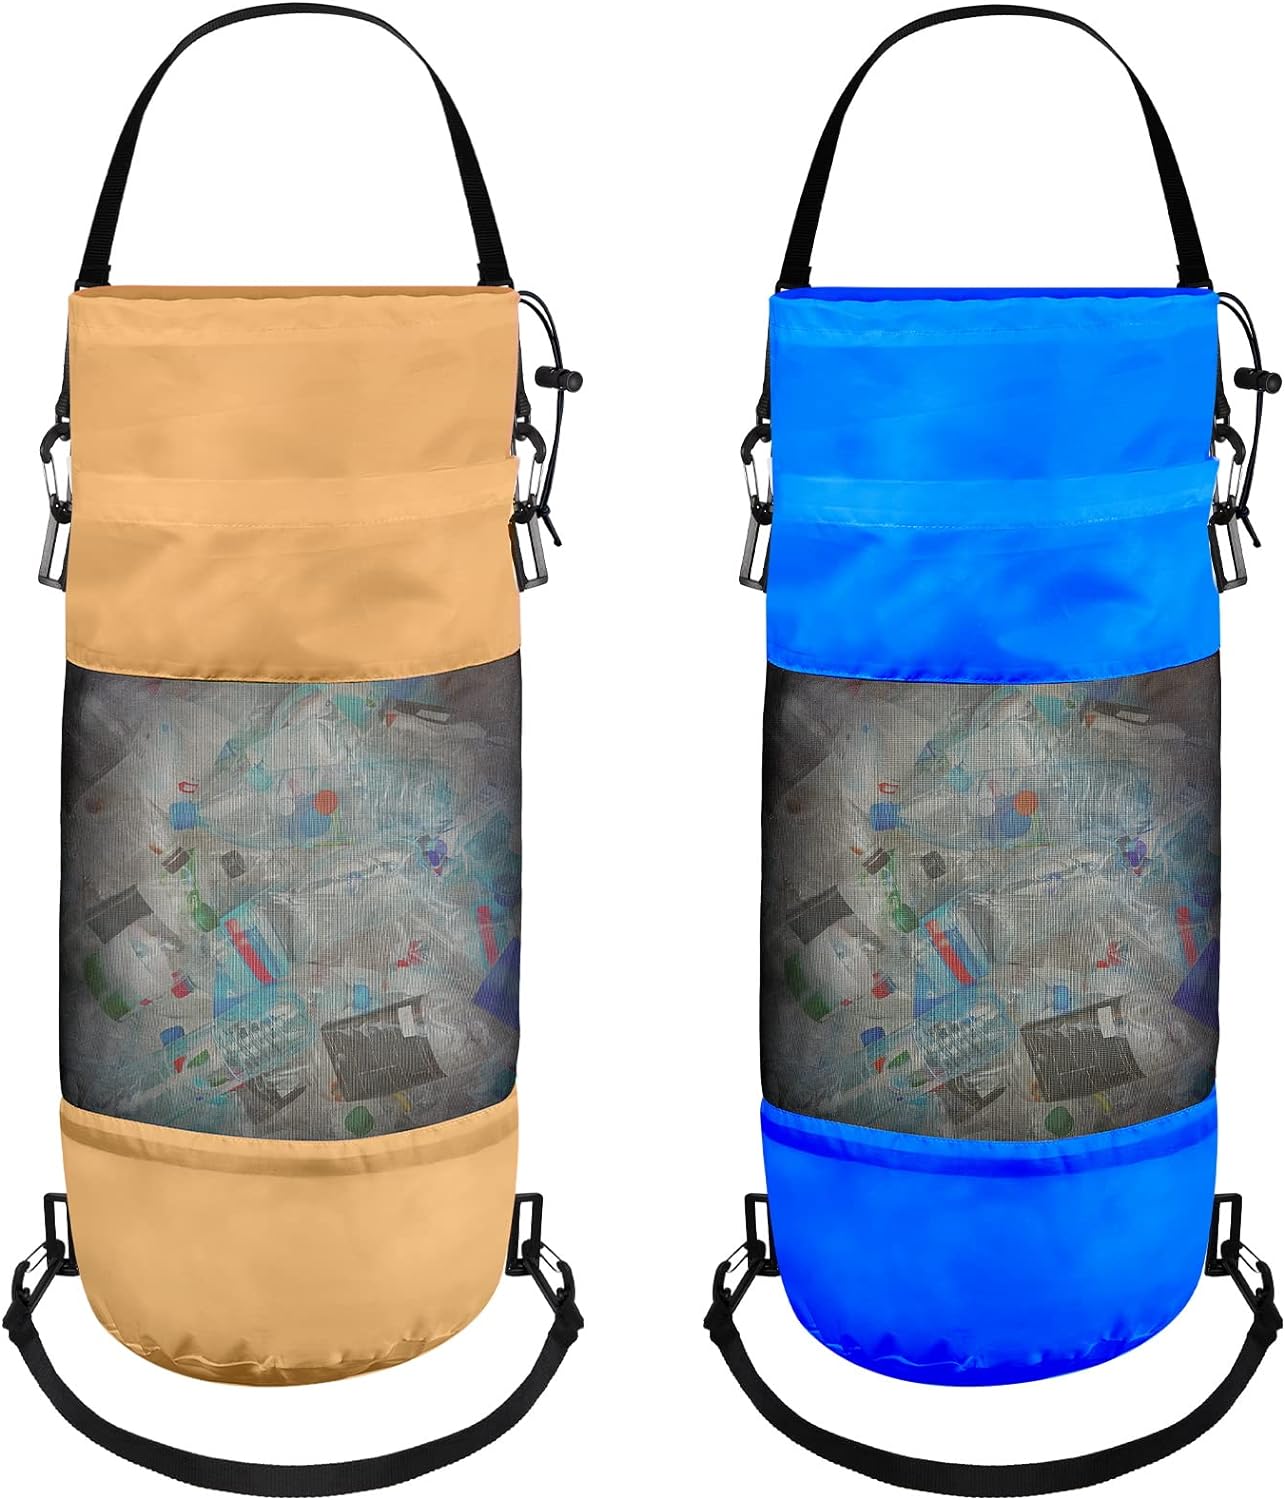 Portable Boat Trash Bags Review